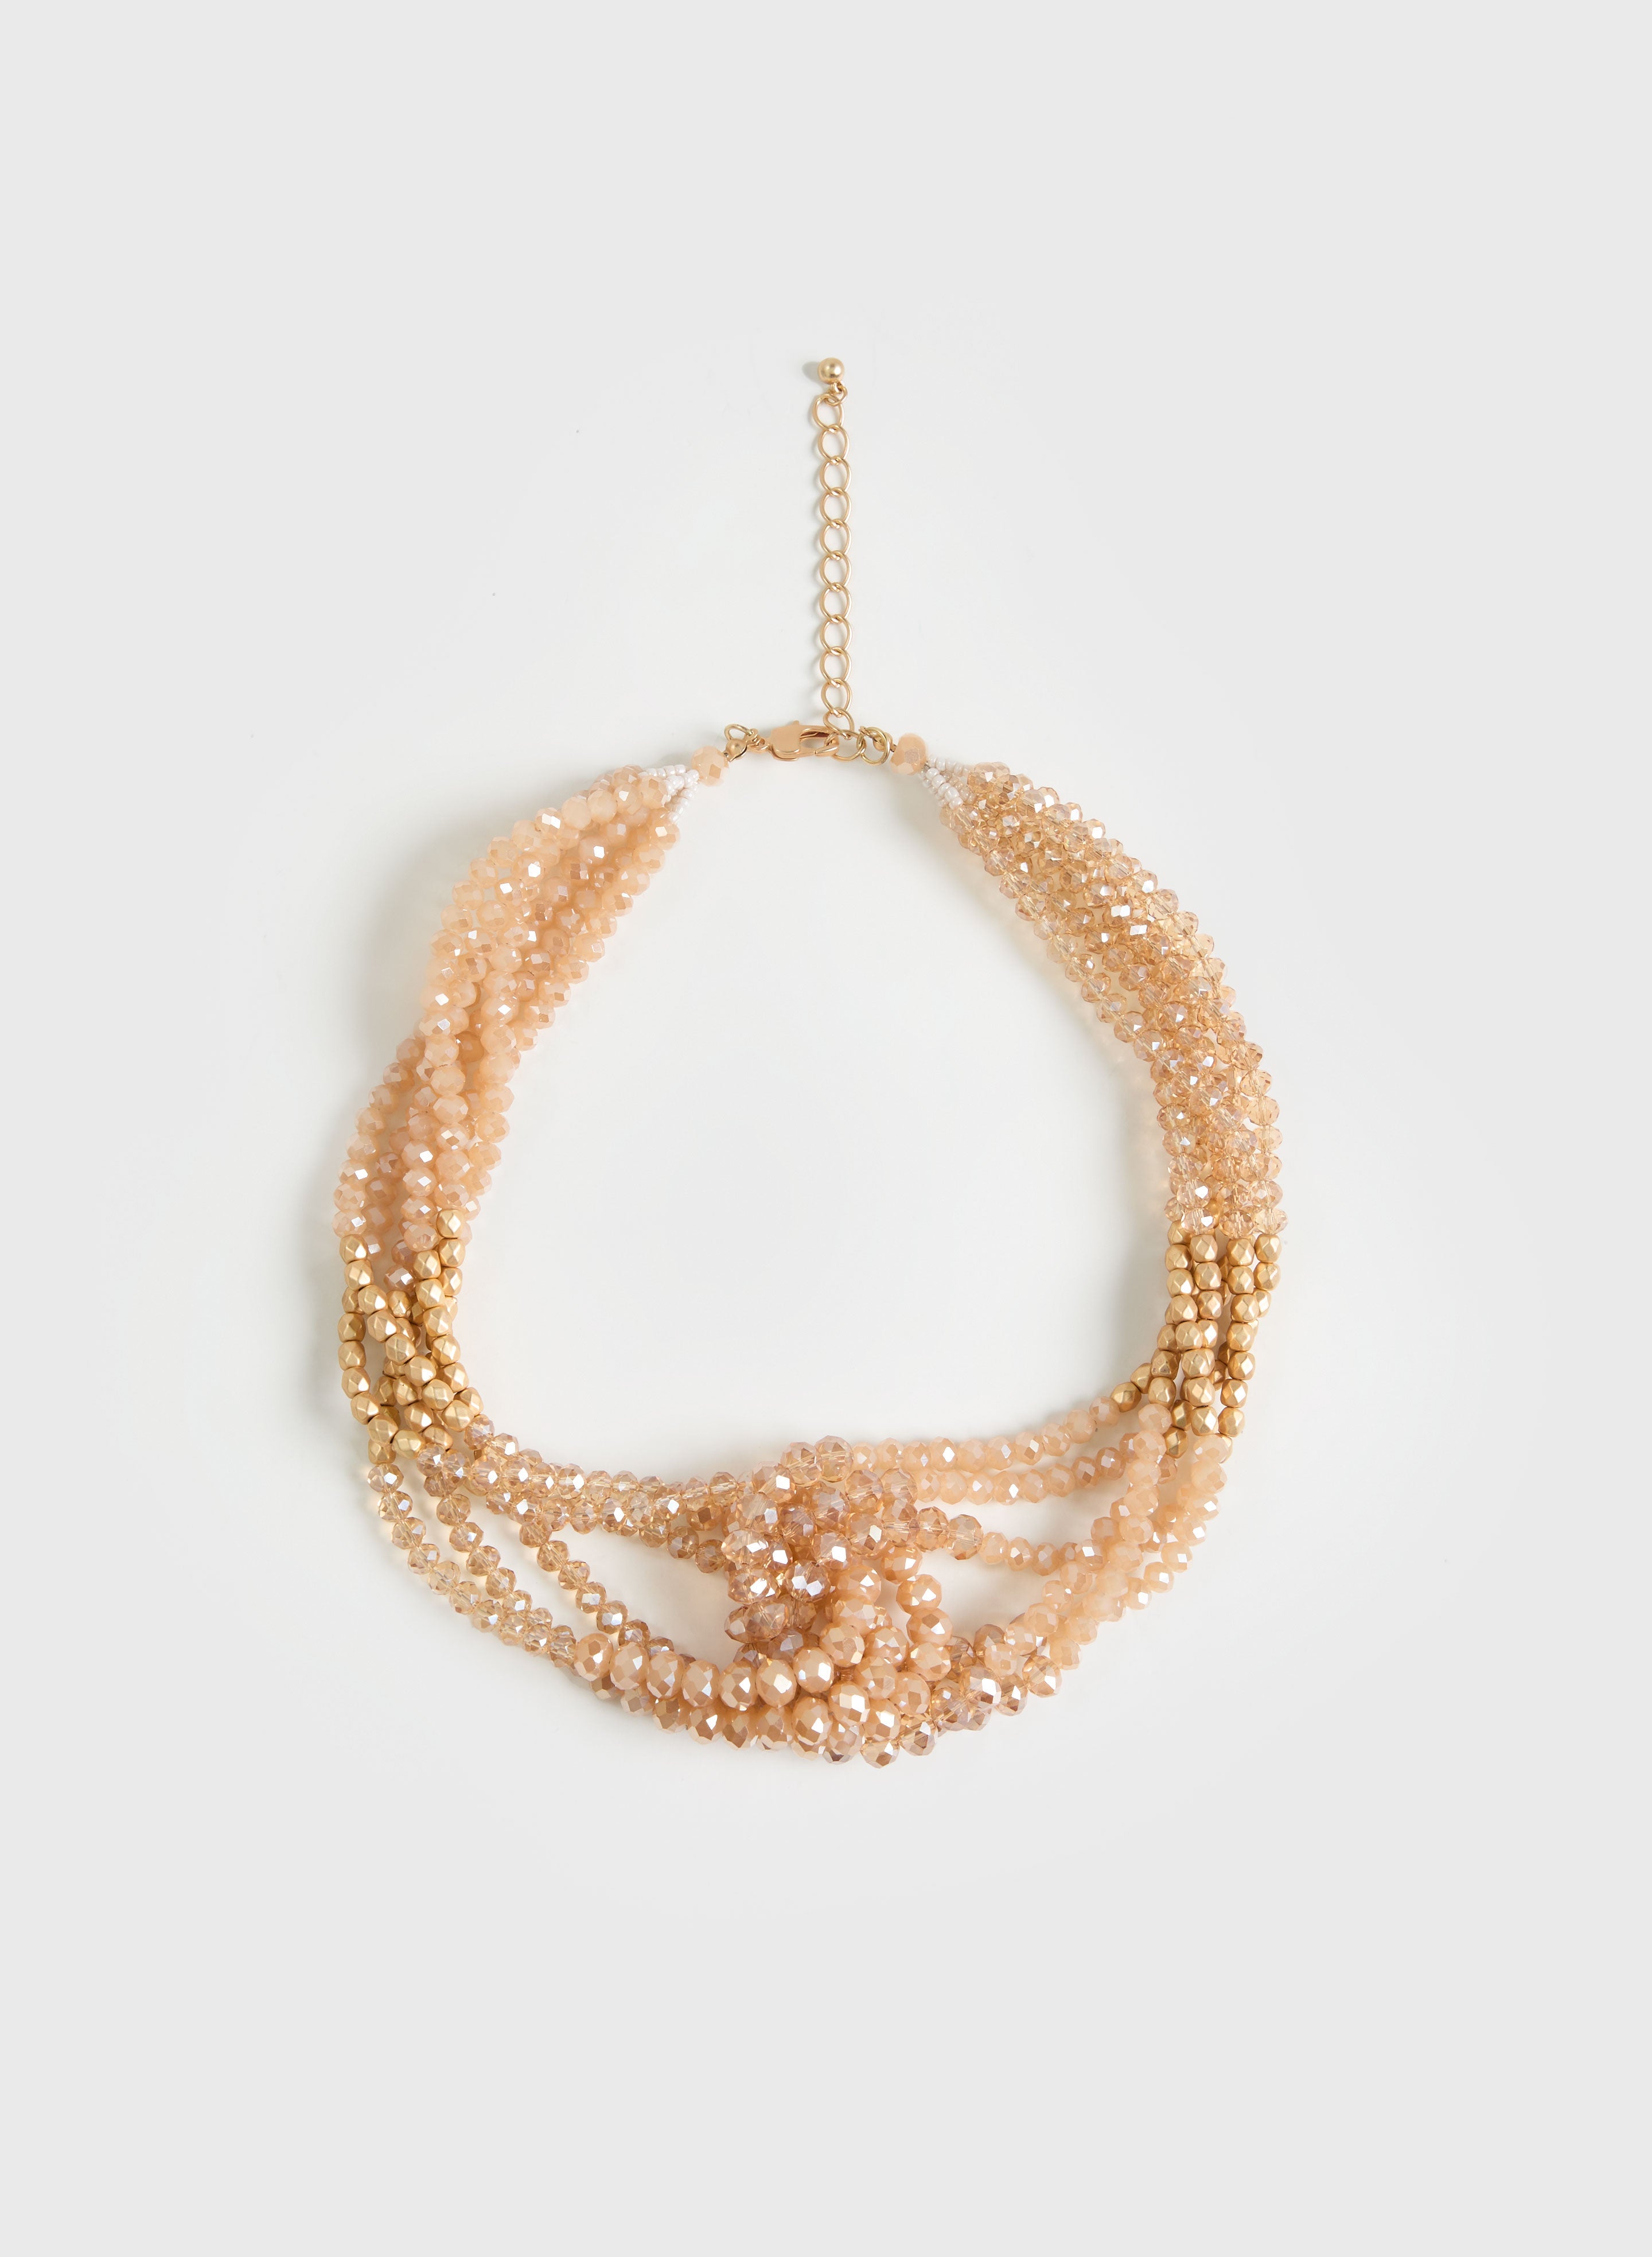 Interlinked Bead Necklace